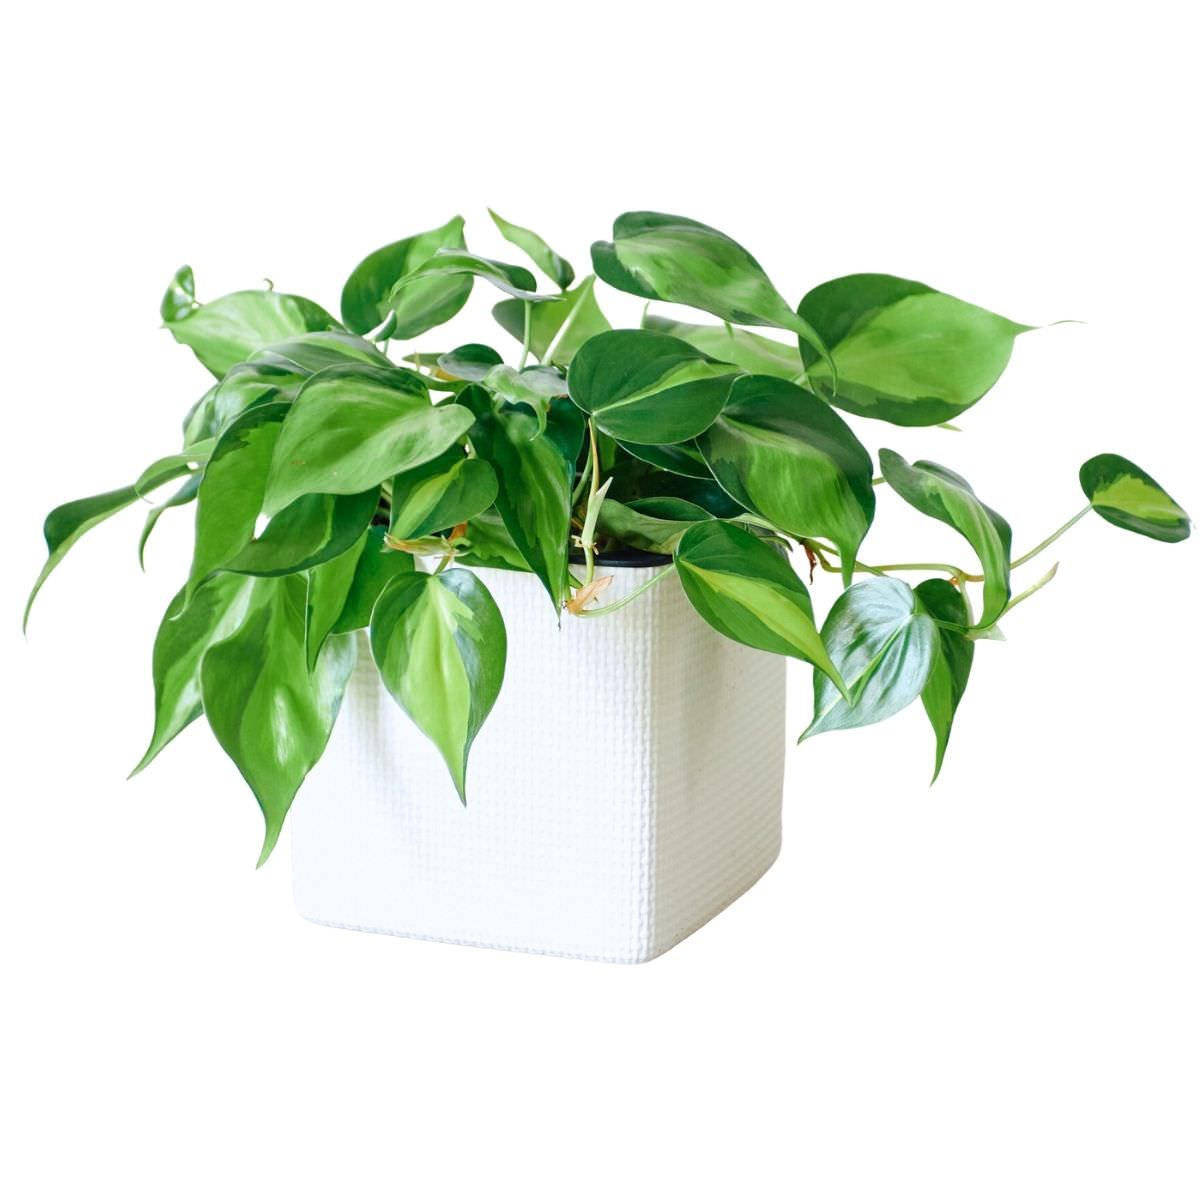 Philodendron Brasil Placed In Lechuza Cube 16 planter - White - My City Plants